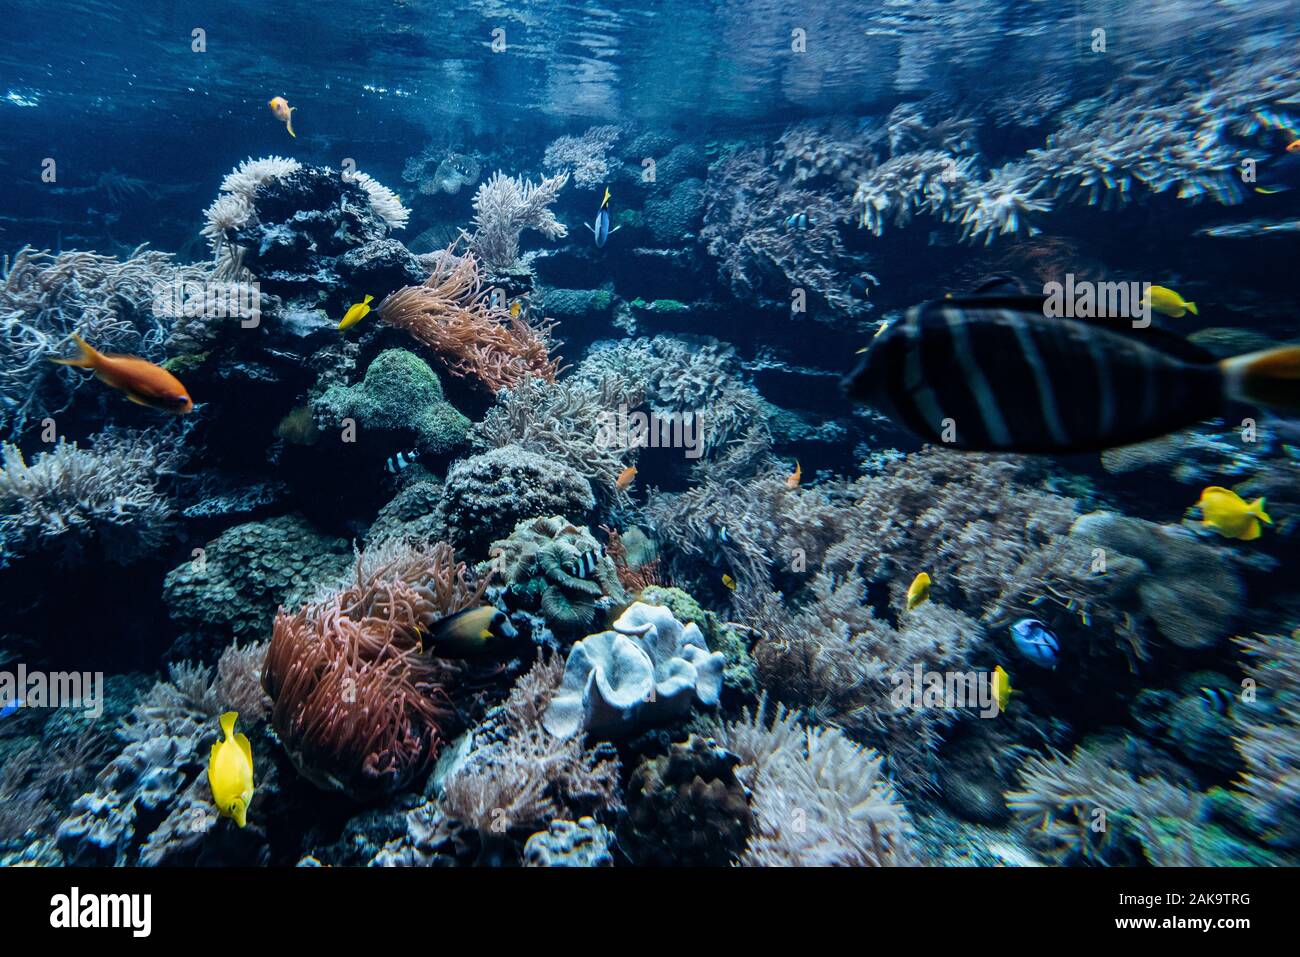 Colorful underwater offshore rocky reef with coral and sponges and small tropical fish swimming by in a blue ocean Stock Photo